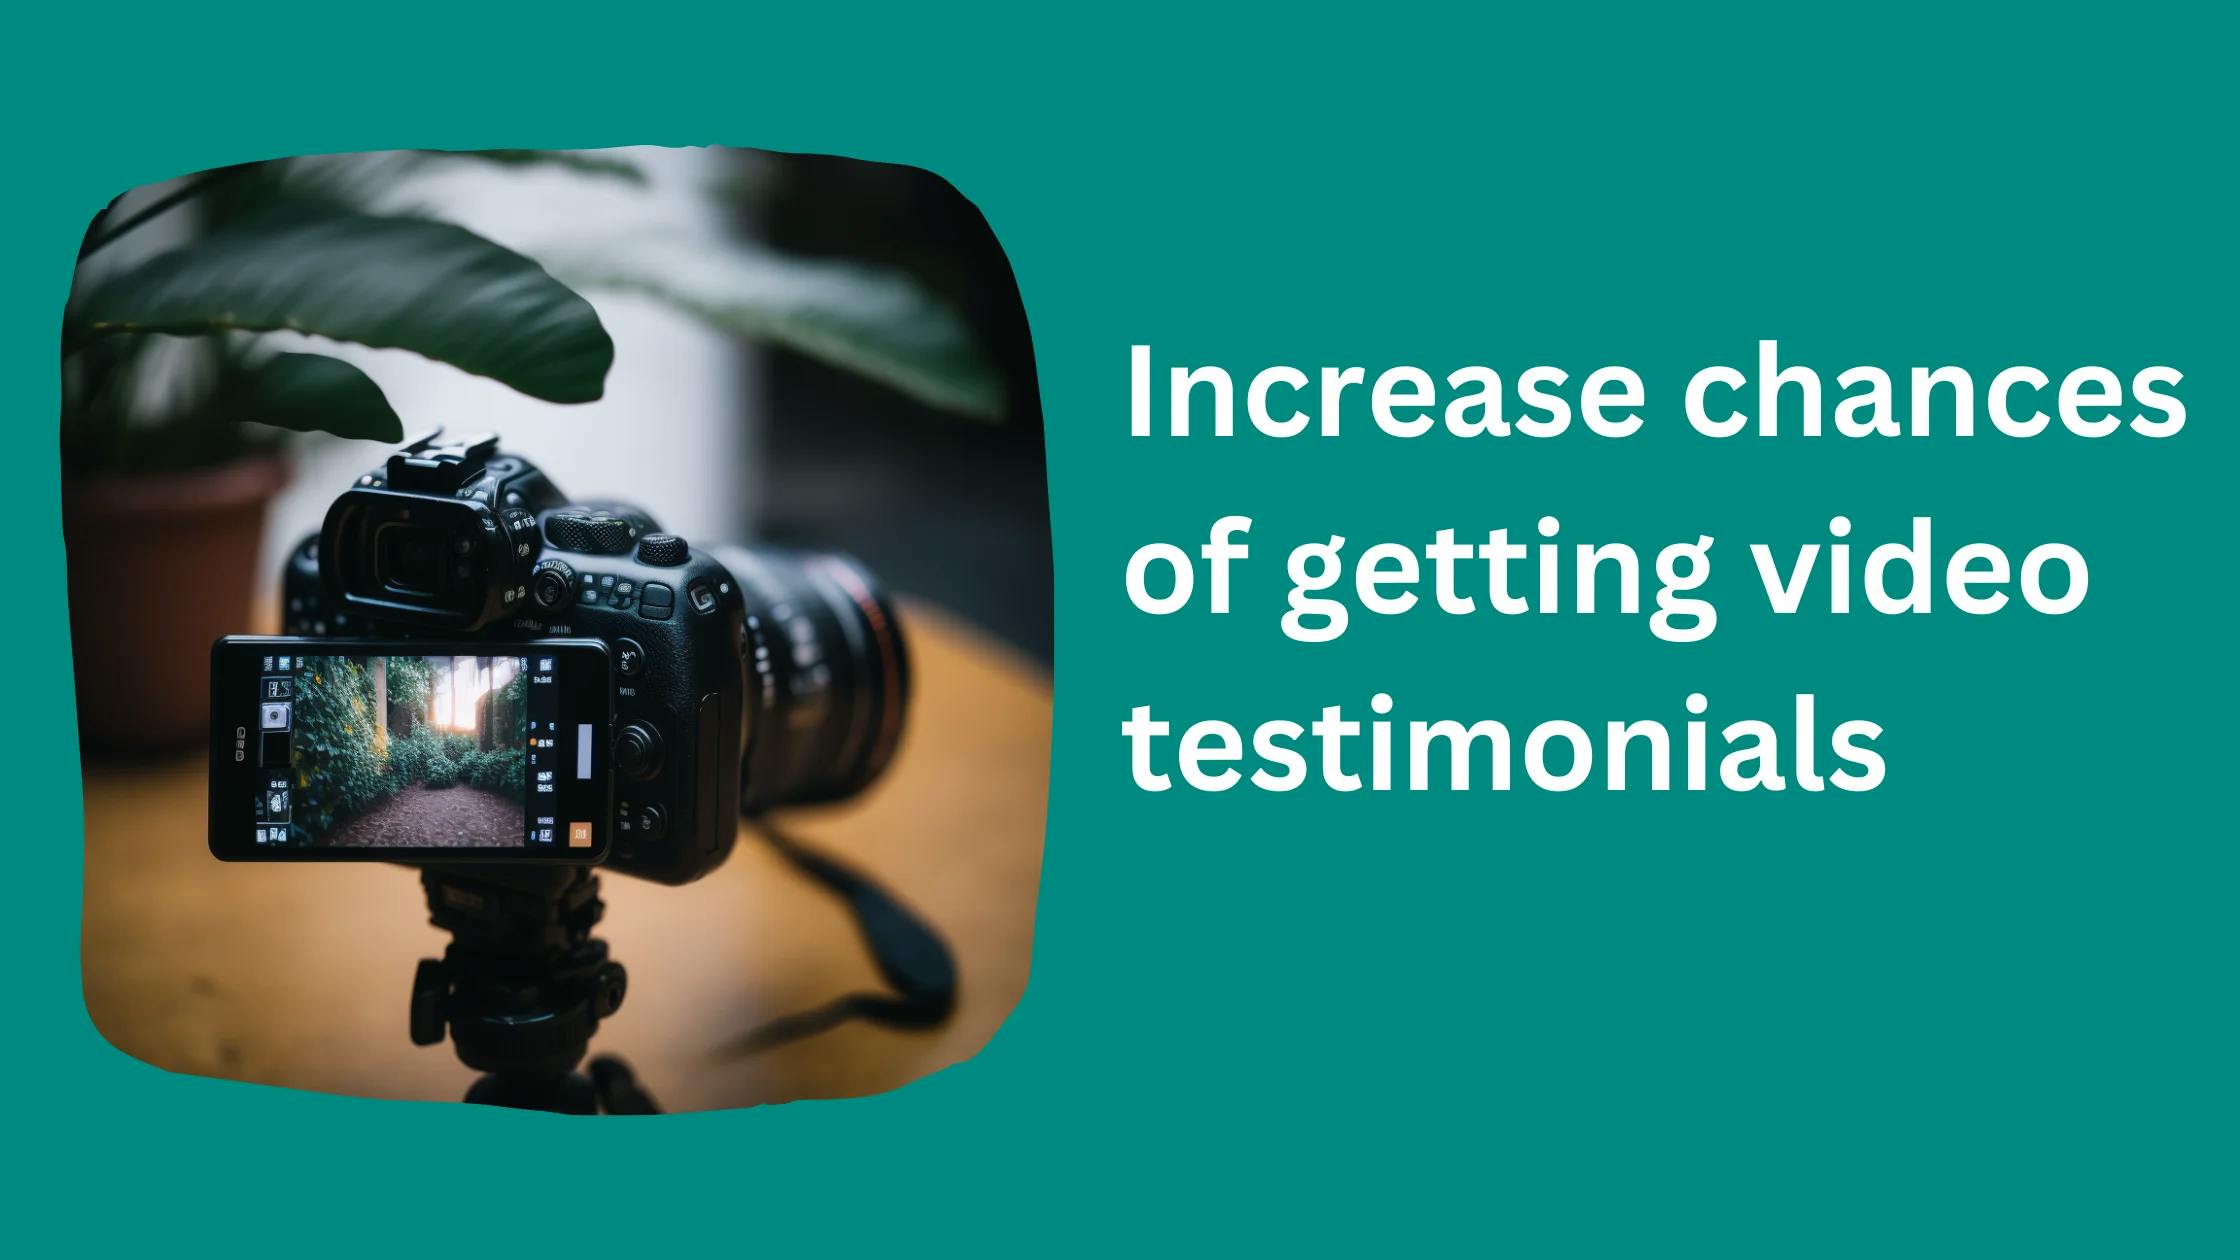 Increase chances of getting video testimonials from customers